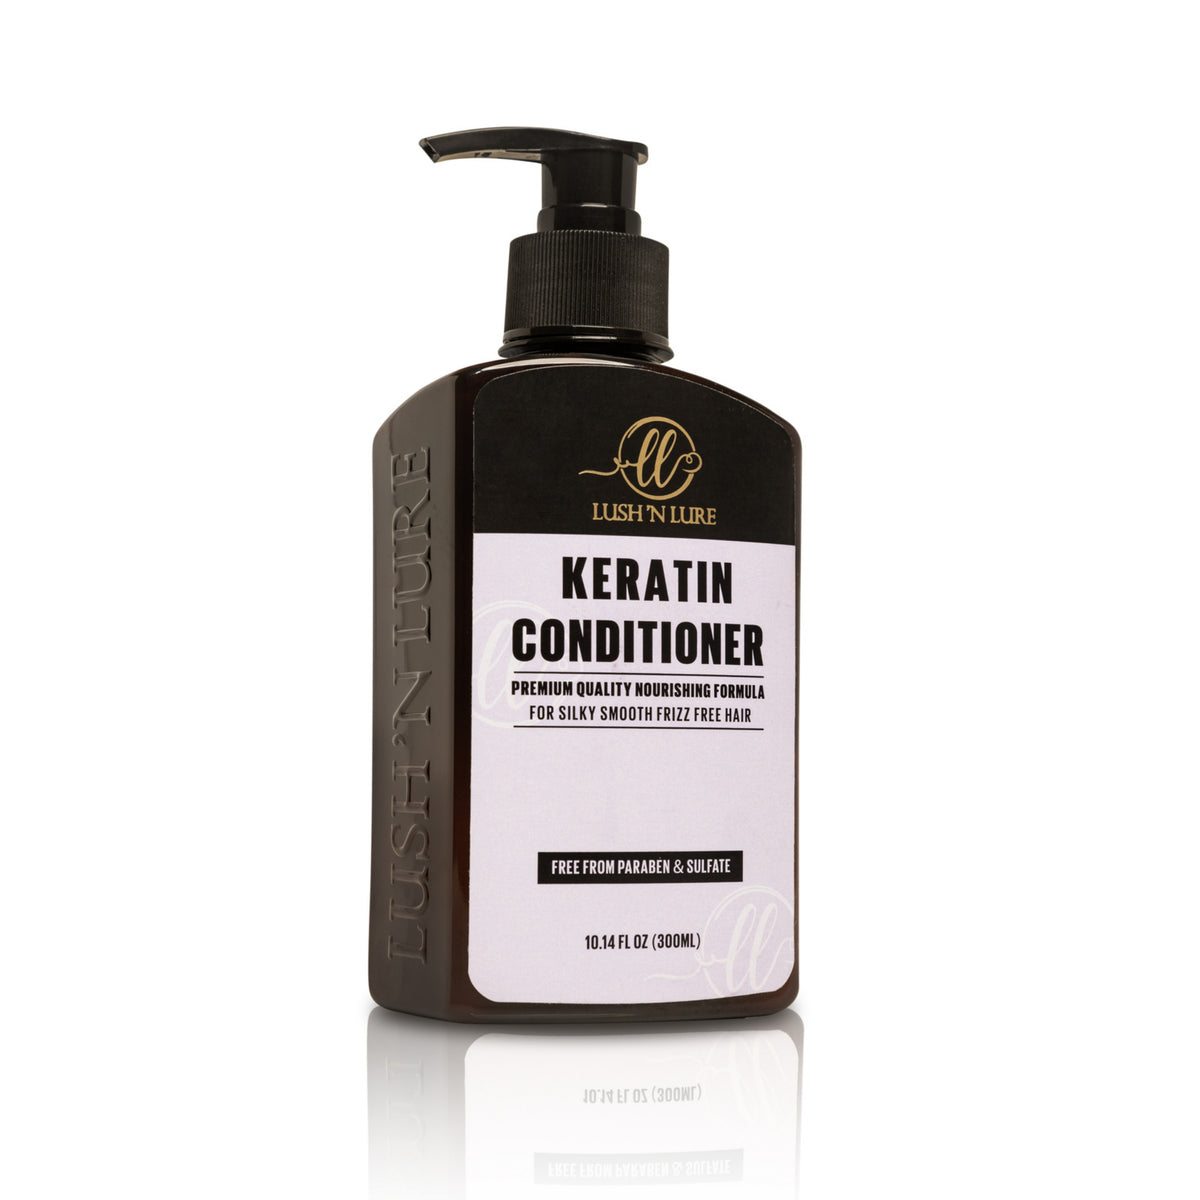 "Image displaying LUSH 'N LURE Keratin Conditioner, a rich and nourishing formula to strengthen and hydrate hair."